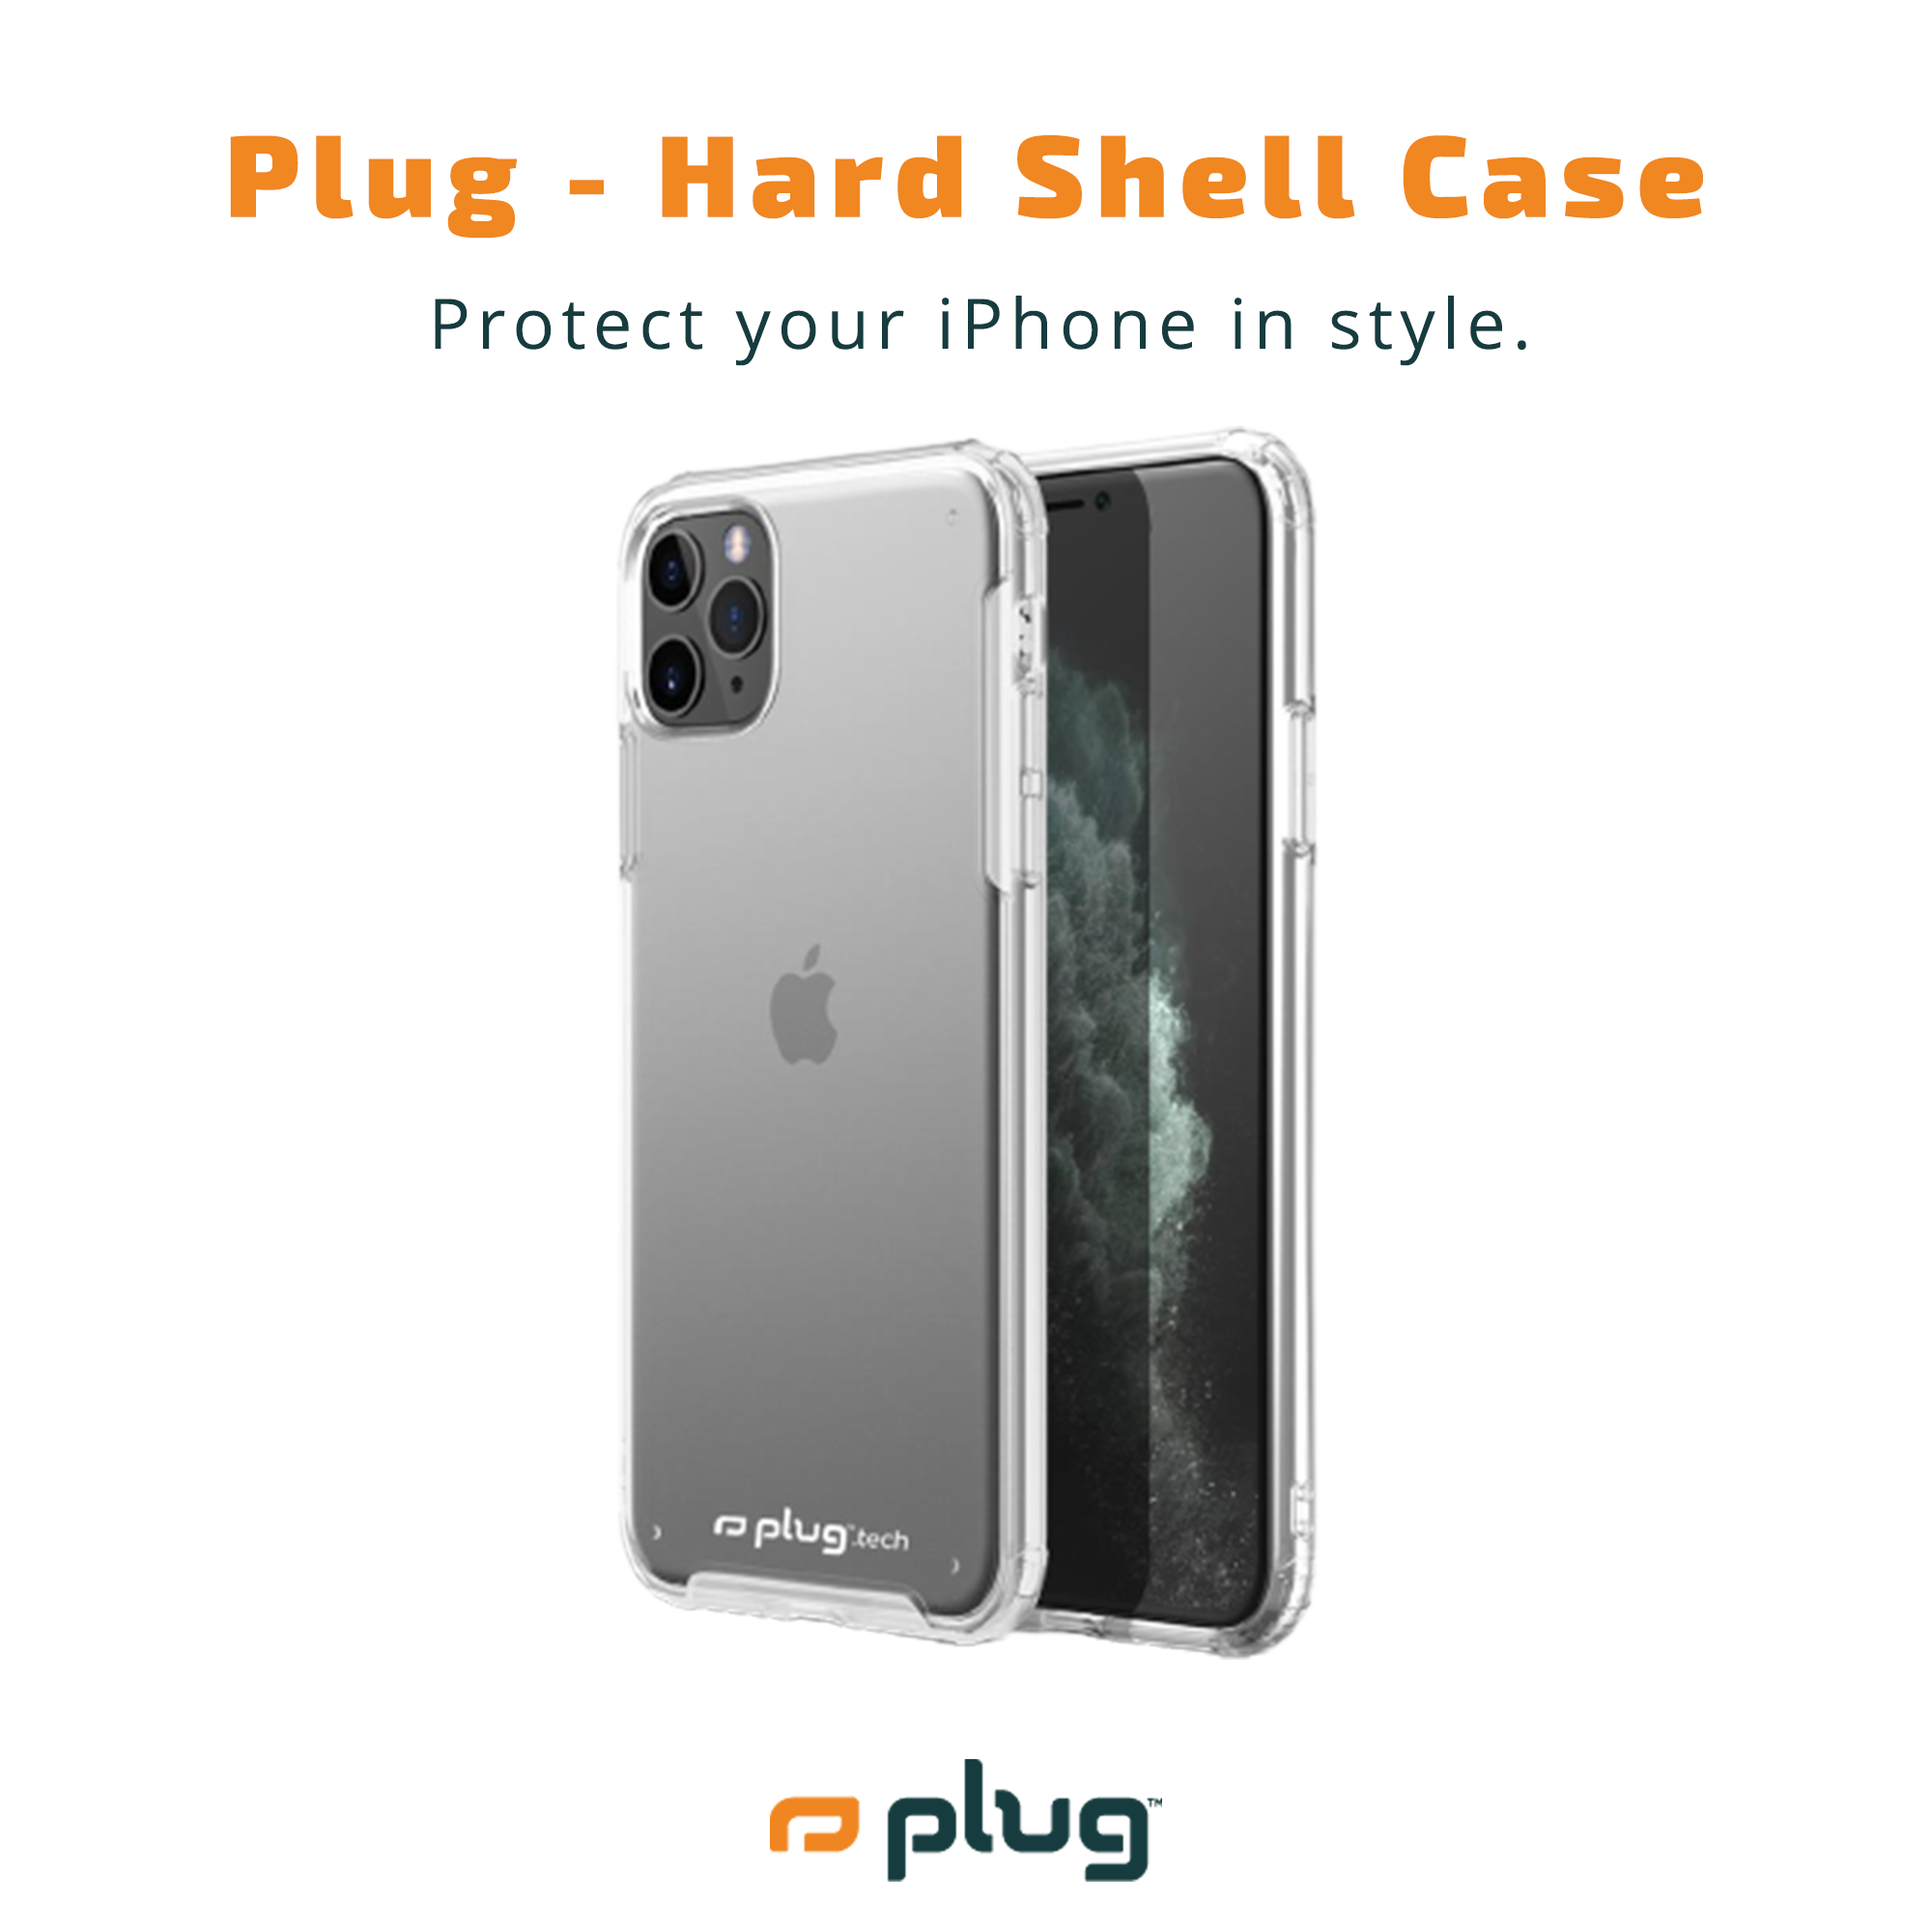 Plug Frosted Case - Hard Shell Case Protective cover for iPhones - Plug.tech